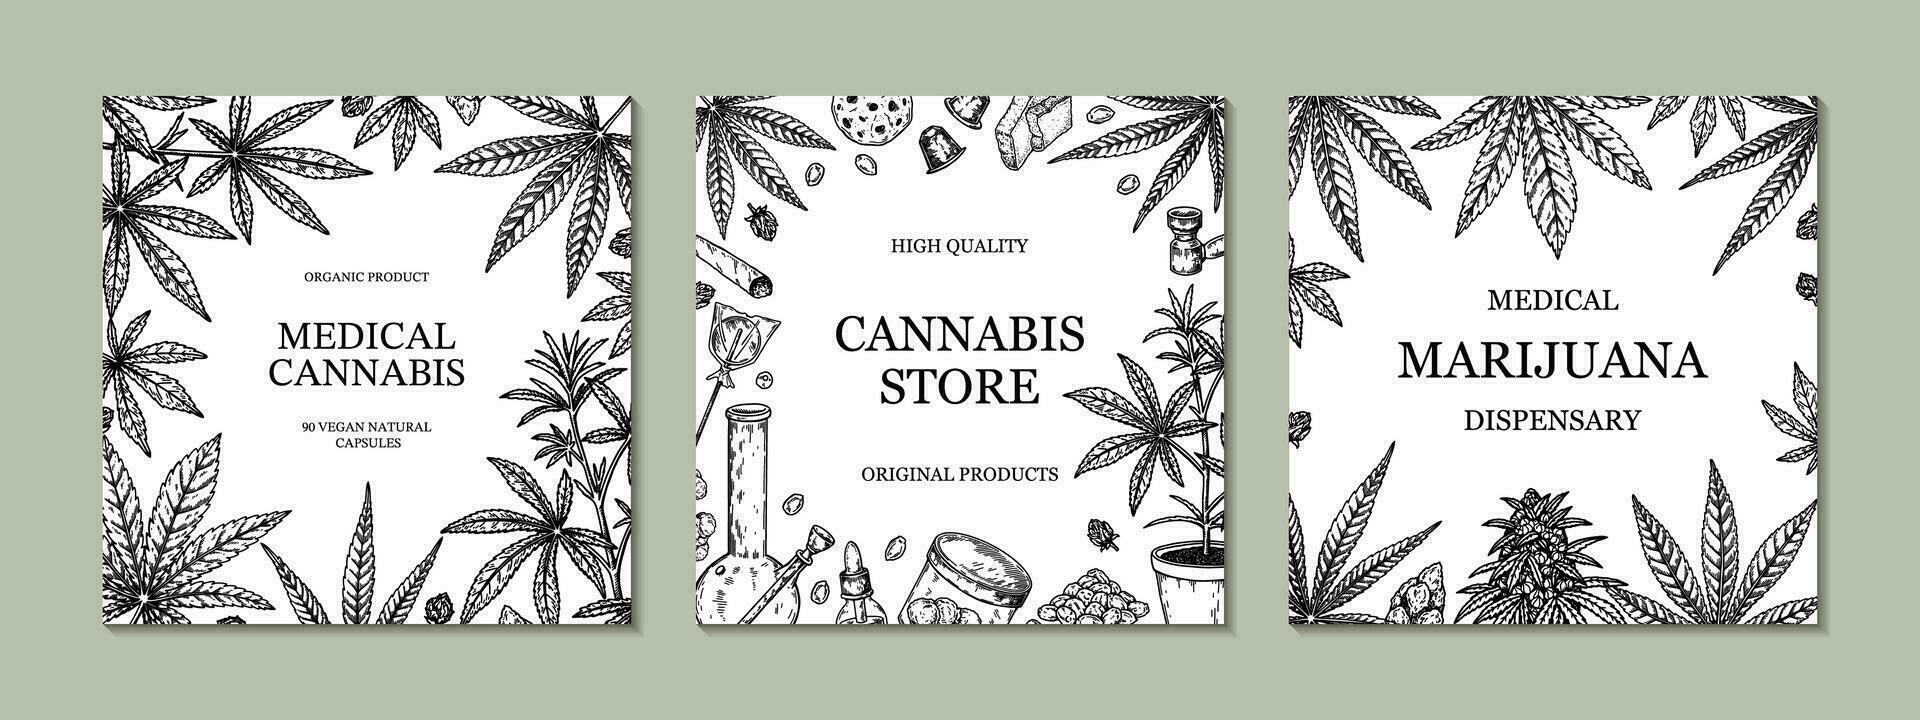 Cannabis square design for packaging, social media posts, store decoration, branding, certificates. Set of marijuana vector illustration in sketch style. Hemp engraved background